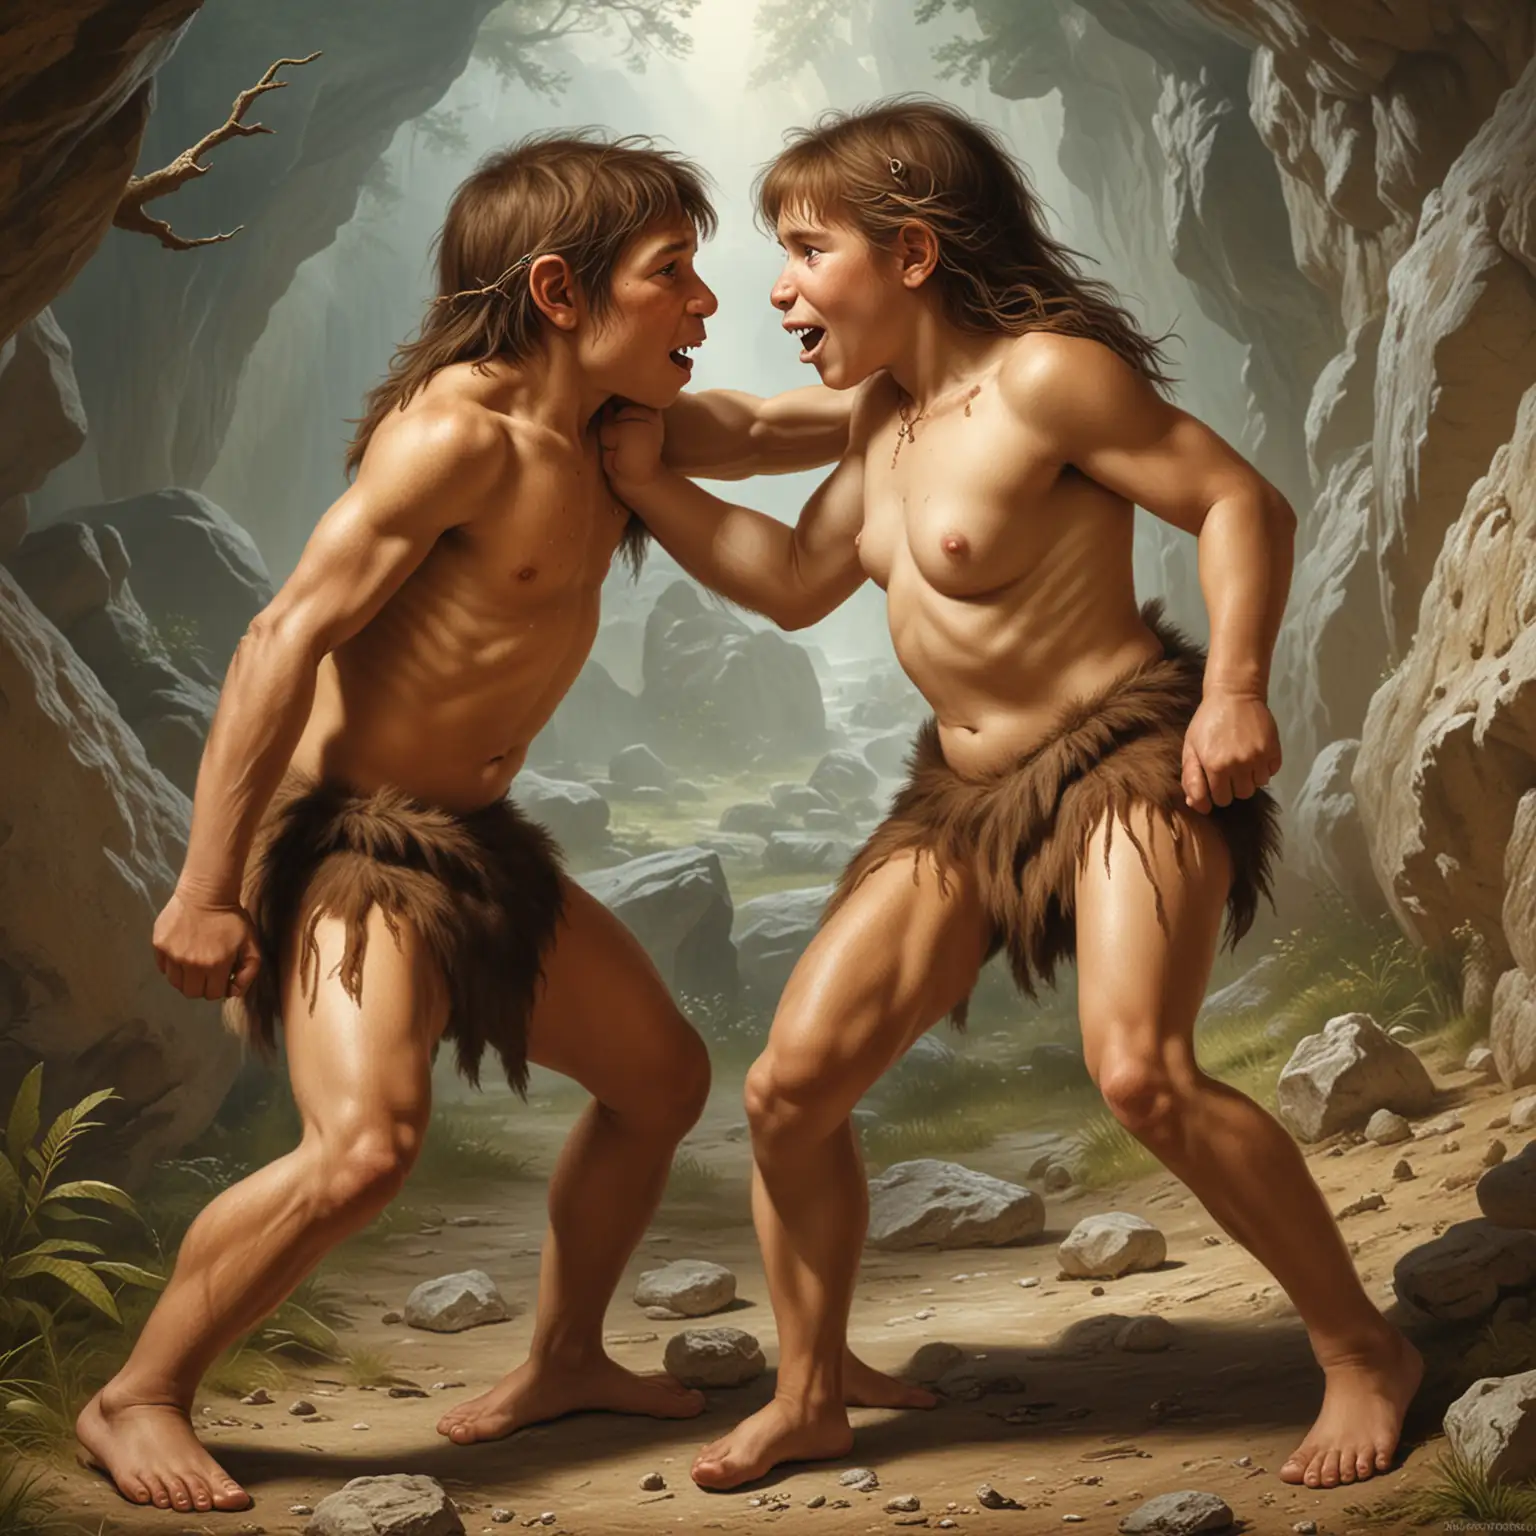 Neanderthal Boy and Girl Engaging in Mating Rituals